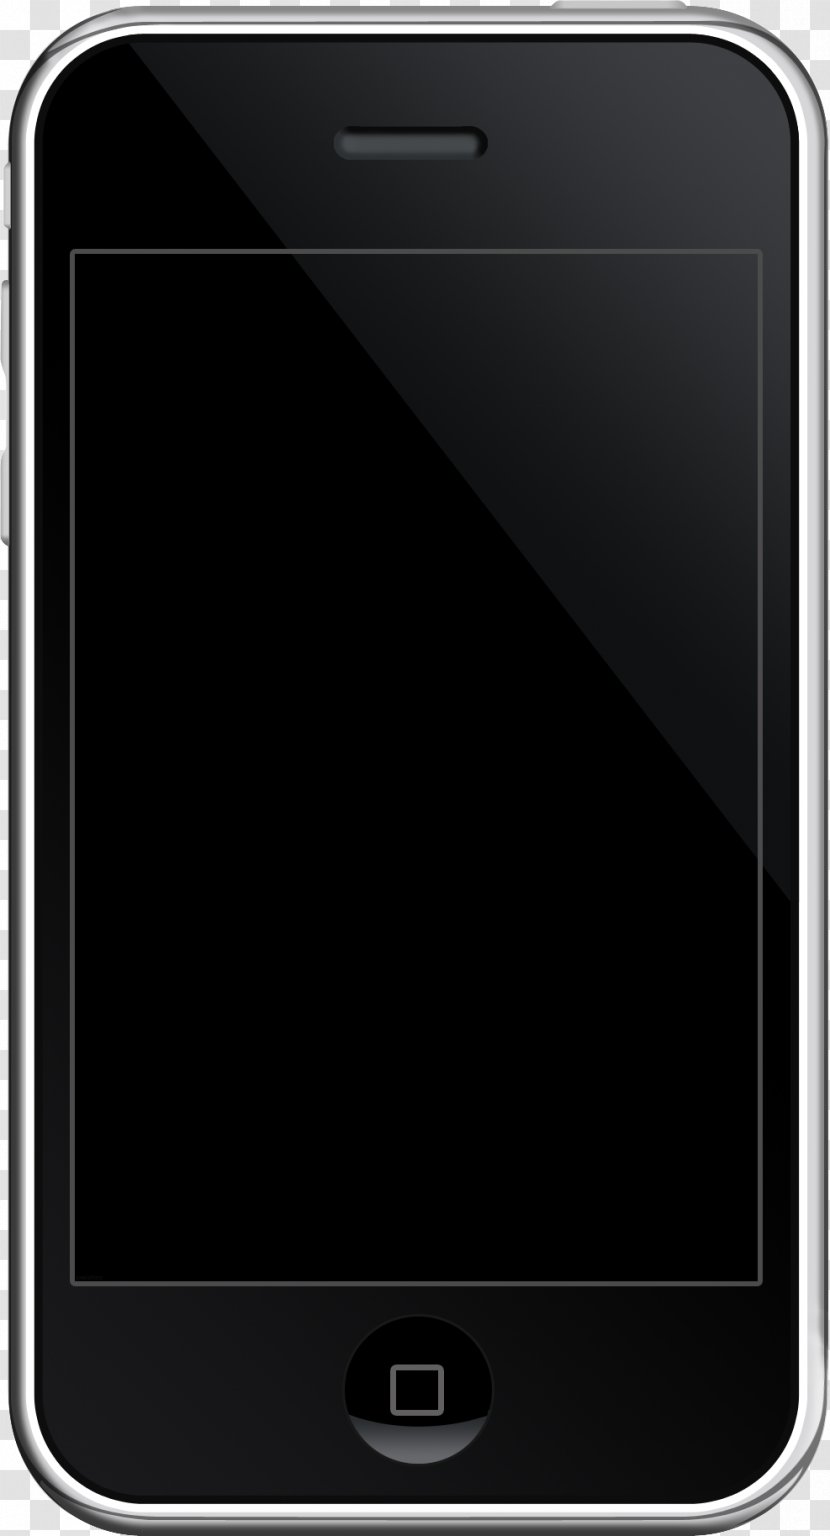 IPhone 3GS Moscone Center Smartphone - Mobile Phones - Iphone Transparent PNG